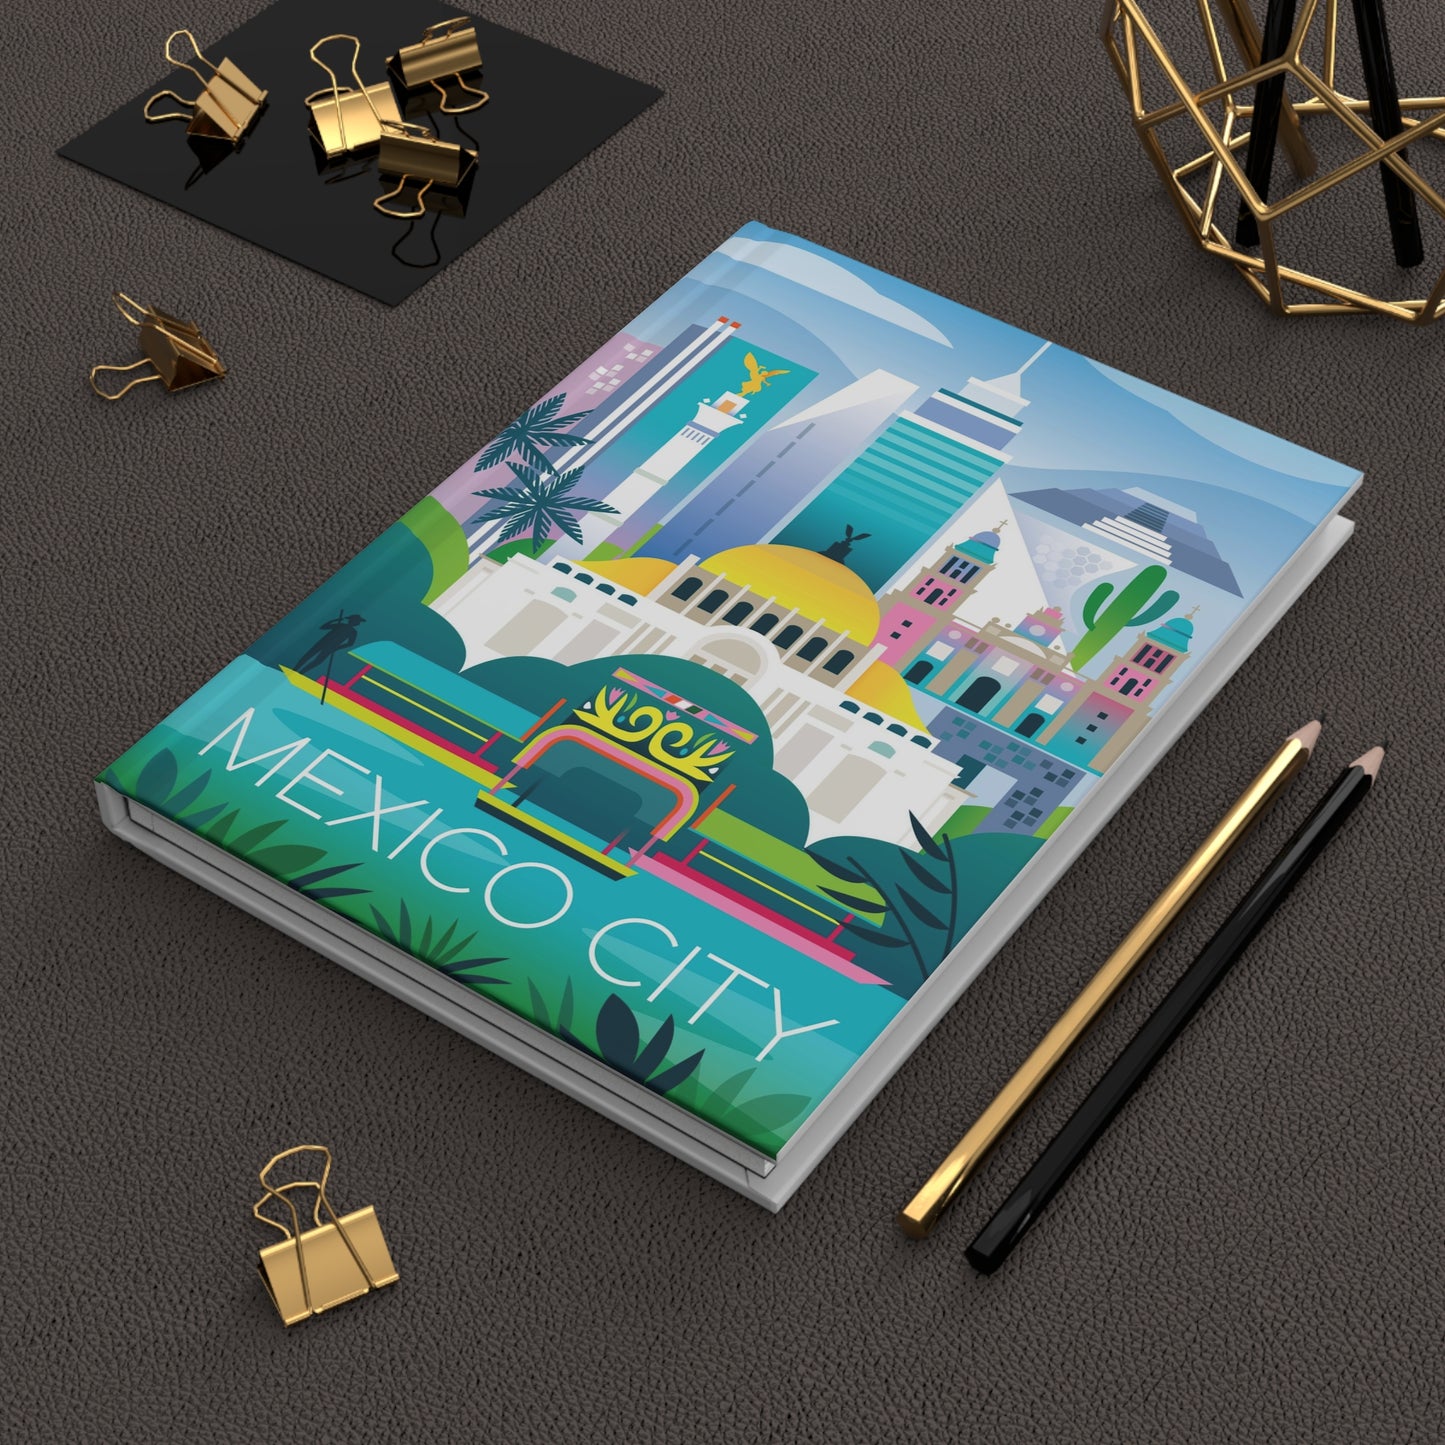 Mexico City Hardcover Journal